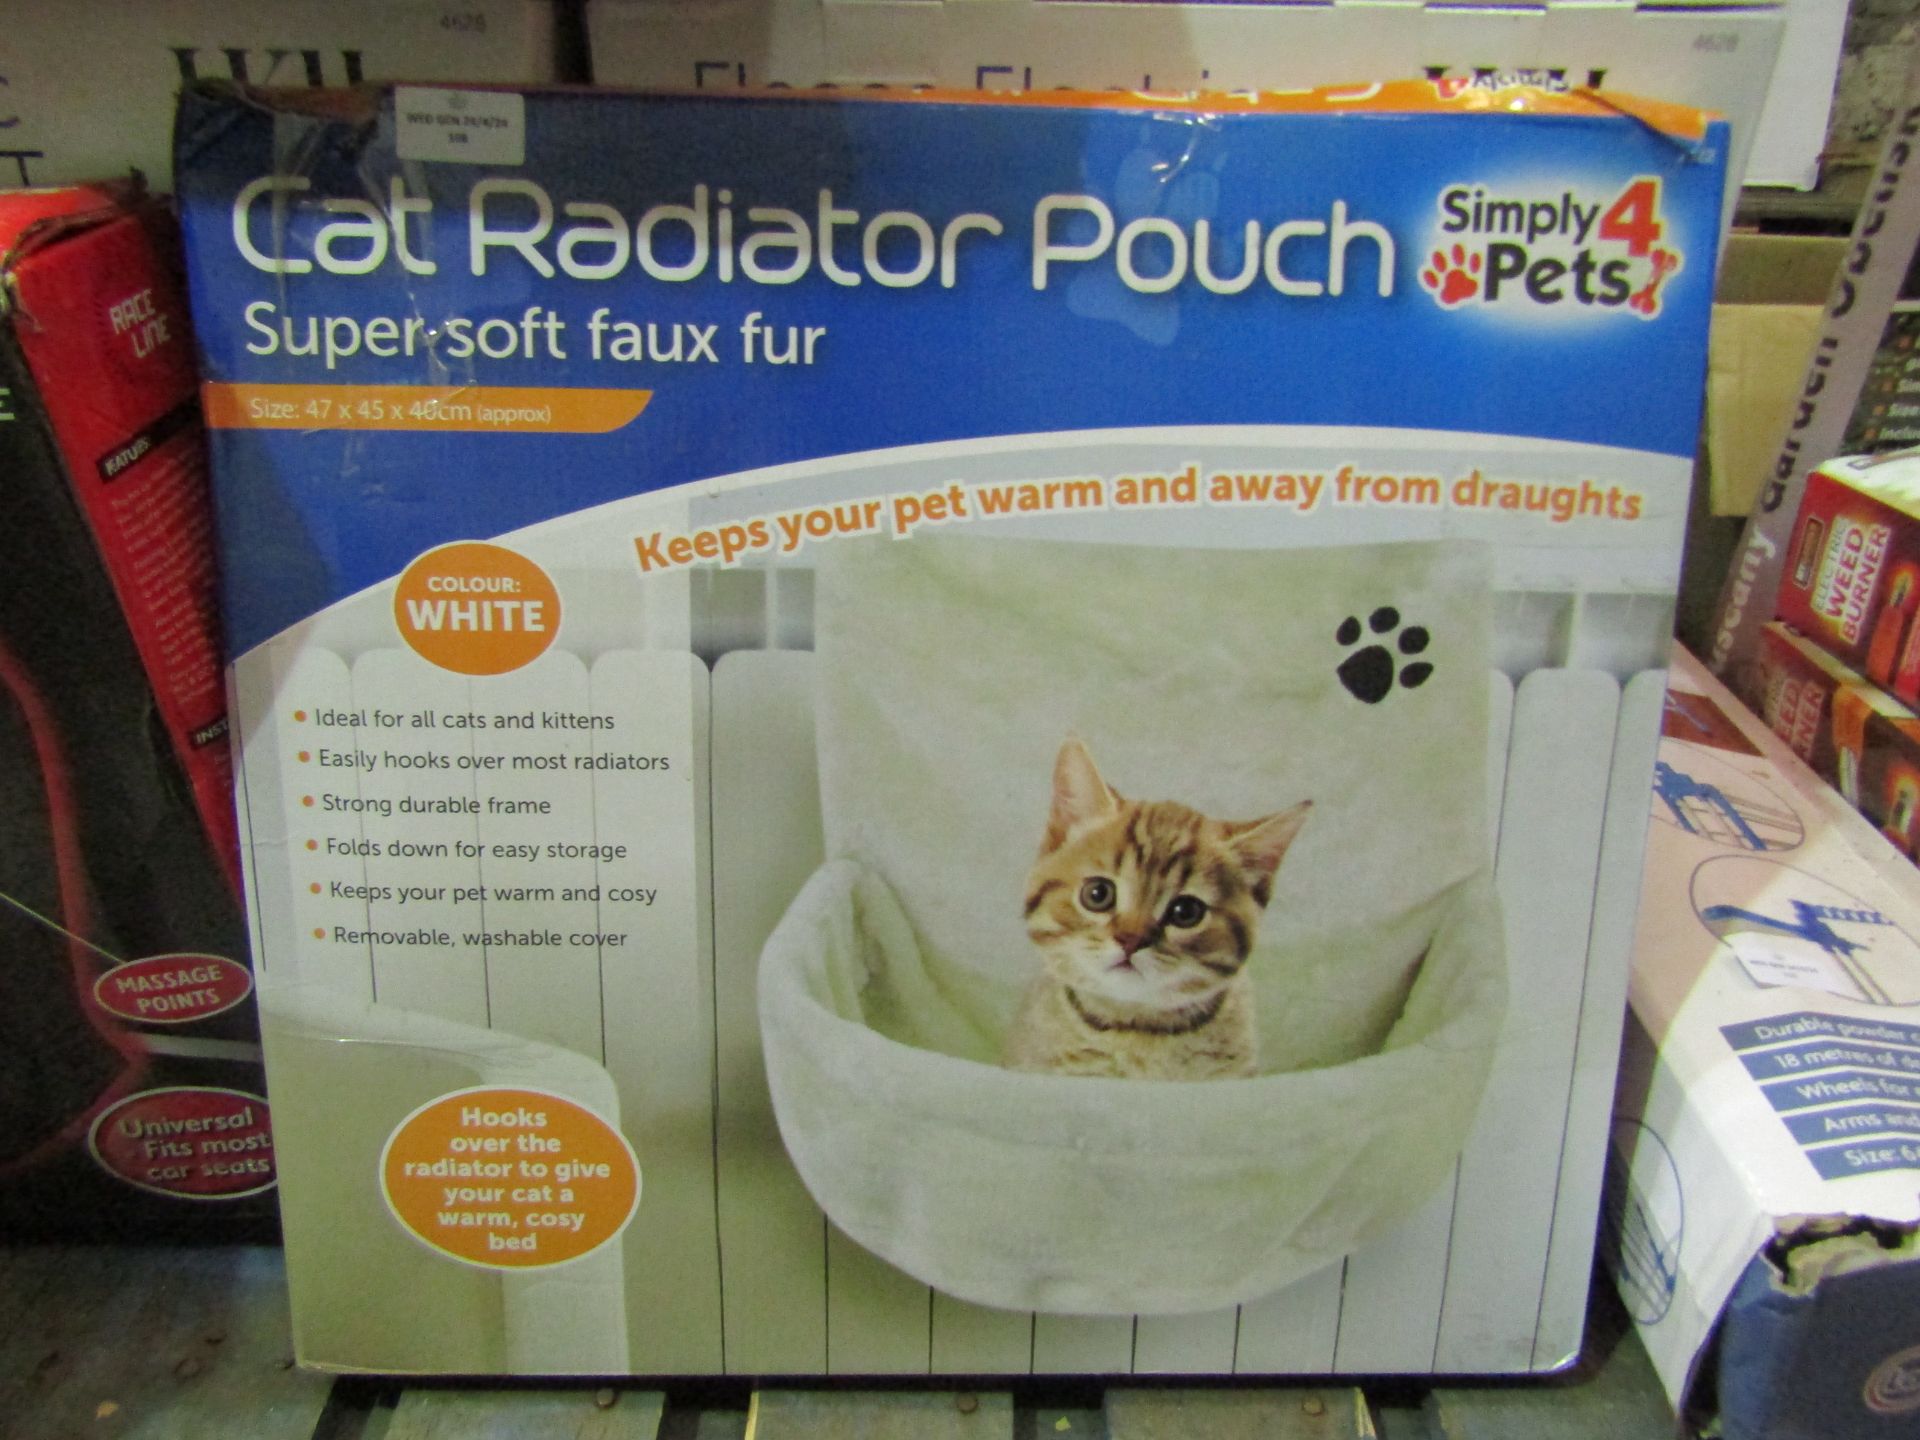 Cat Radiator Pouch Super Soft Faux Fur Size 47 X 45 X 40 CM Unchecked & Boxed